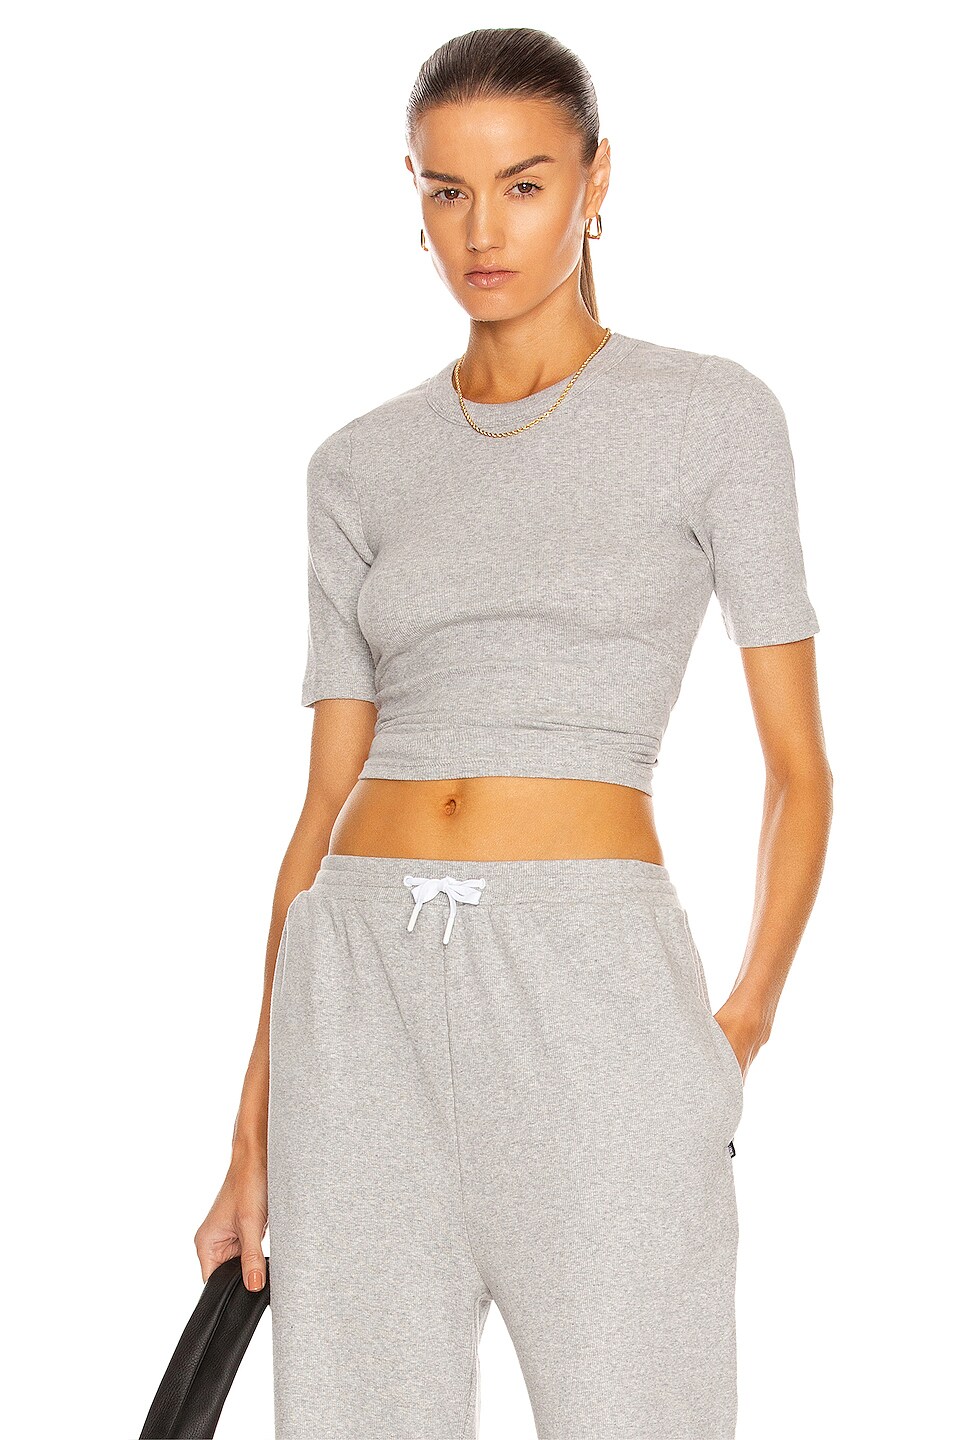 Image 1 of LE BUNS Evie Organic Ribbed Cotton Top in Grey Marle